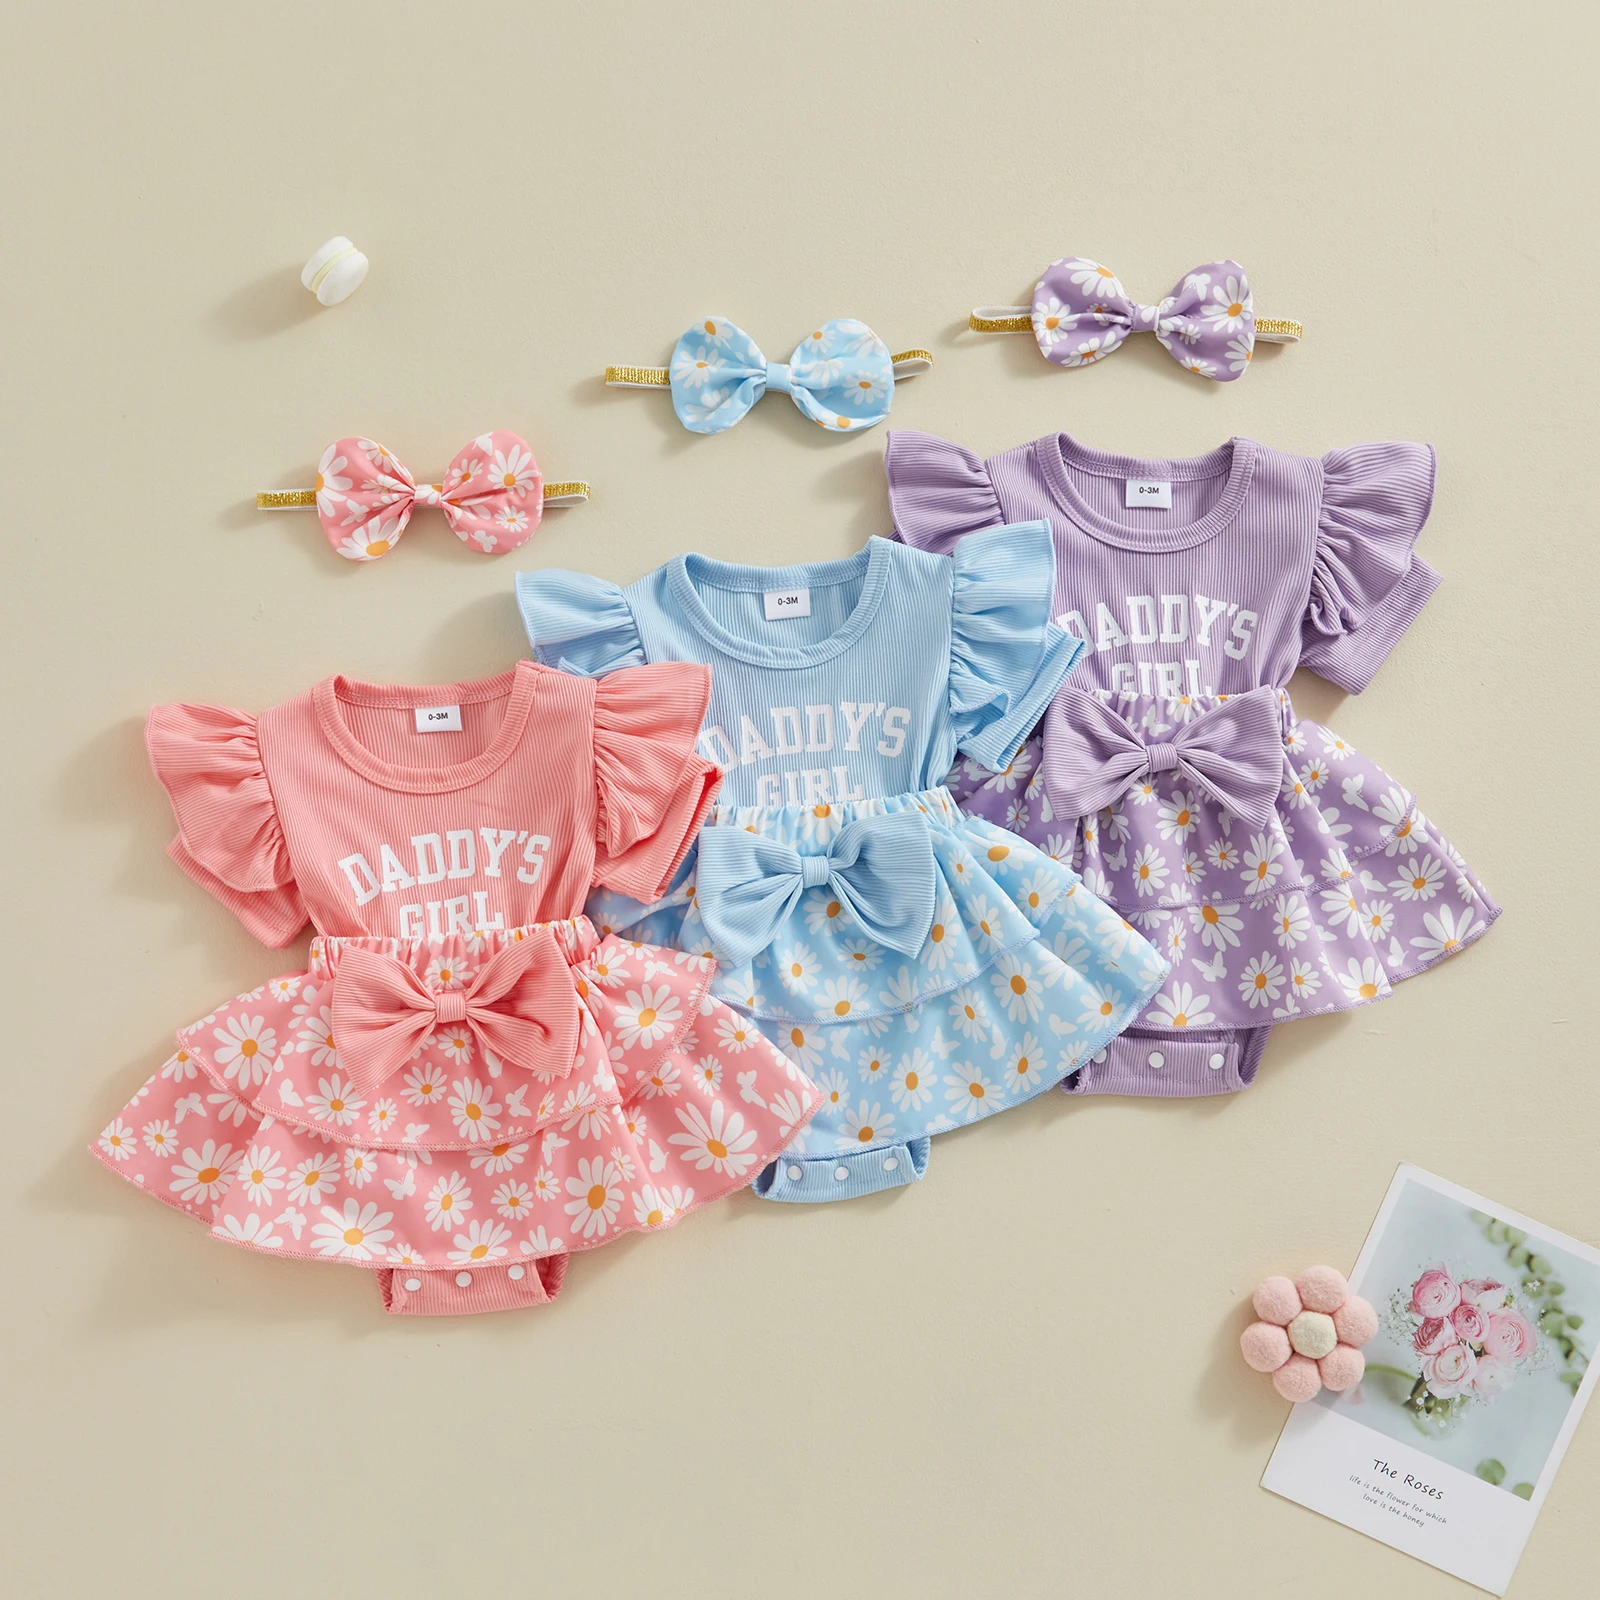 

Listenwind Baby Girls Summer Romper Dress Flying Sleeve Letter Daisy Print Patchwork Romper with Headband For 0-18 Months